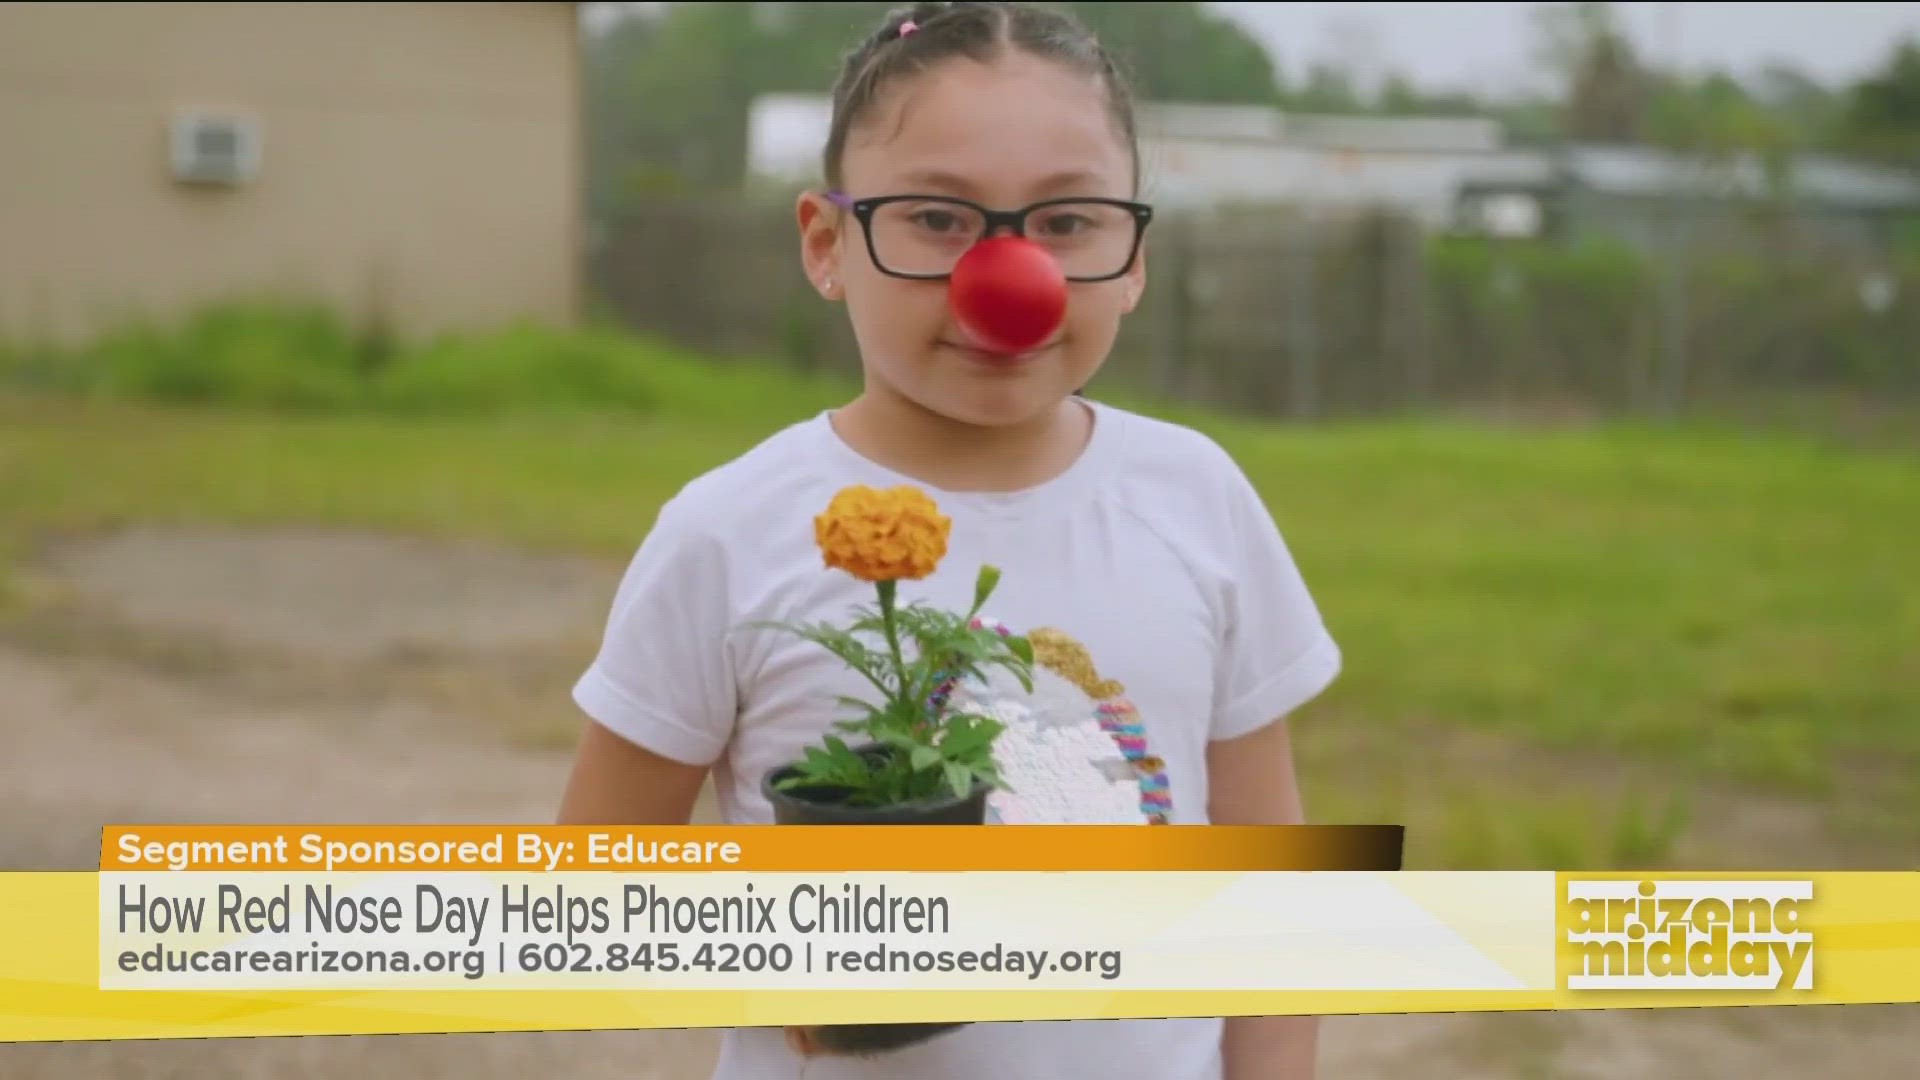 Red Nose Day is an annual fundraising event happening Thursday. It helps fund community programs like Educare here in the valley helping kids succeed in school.